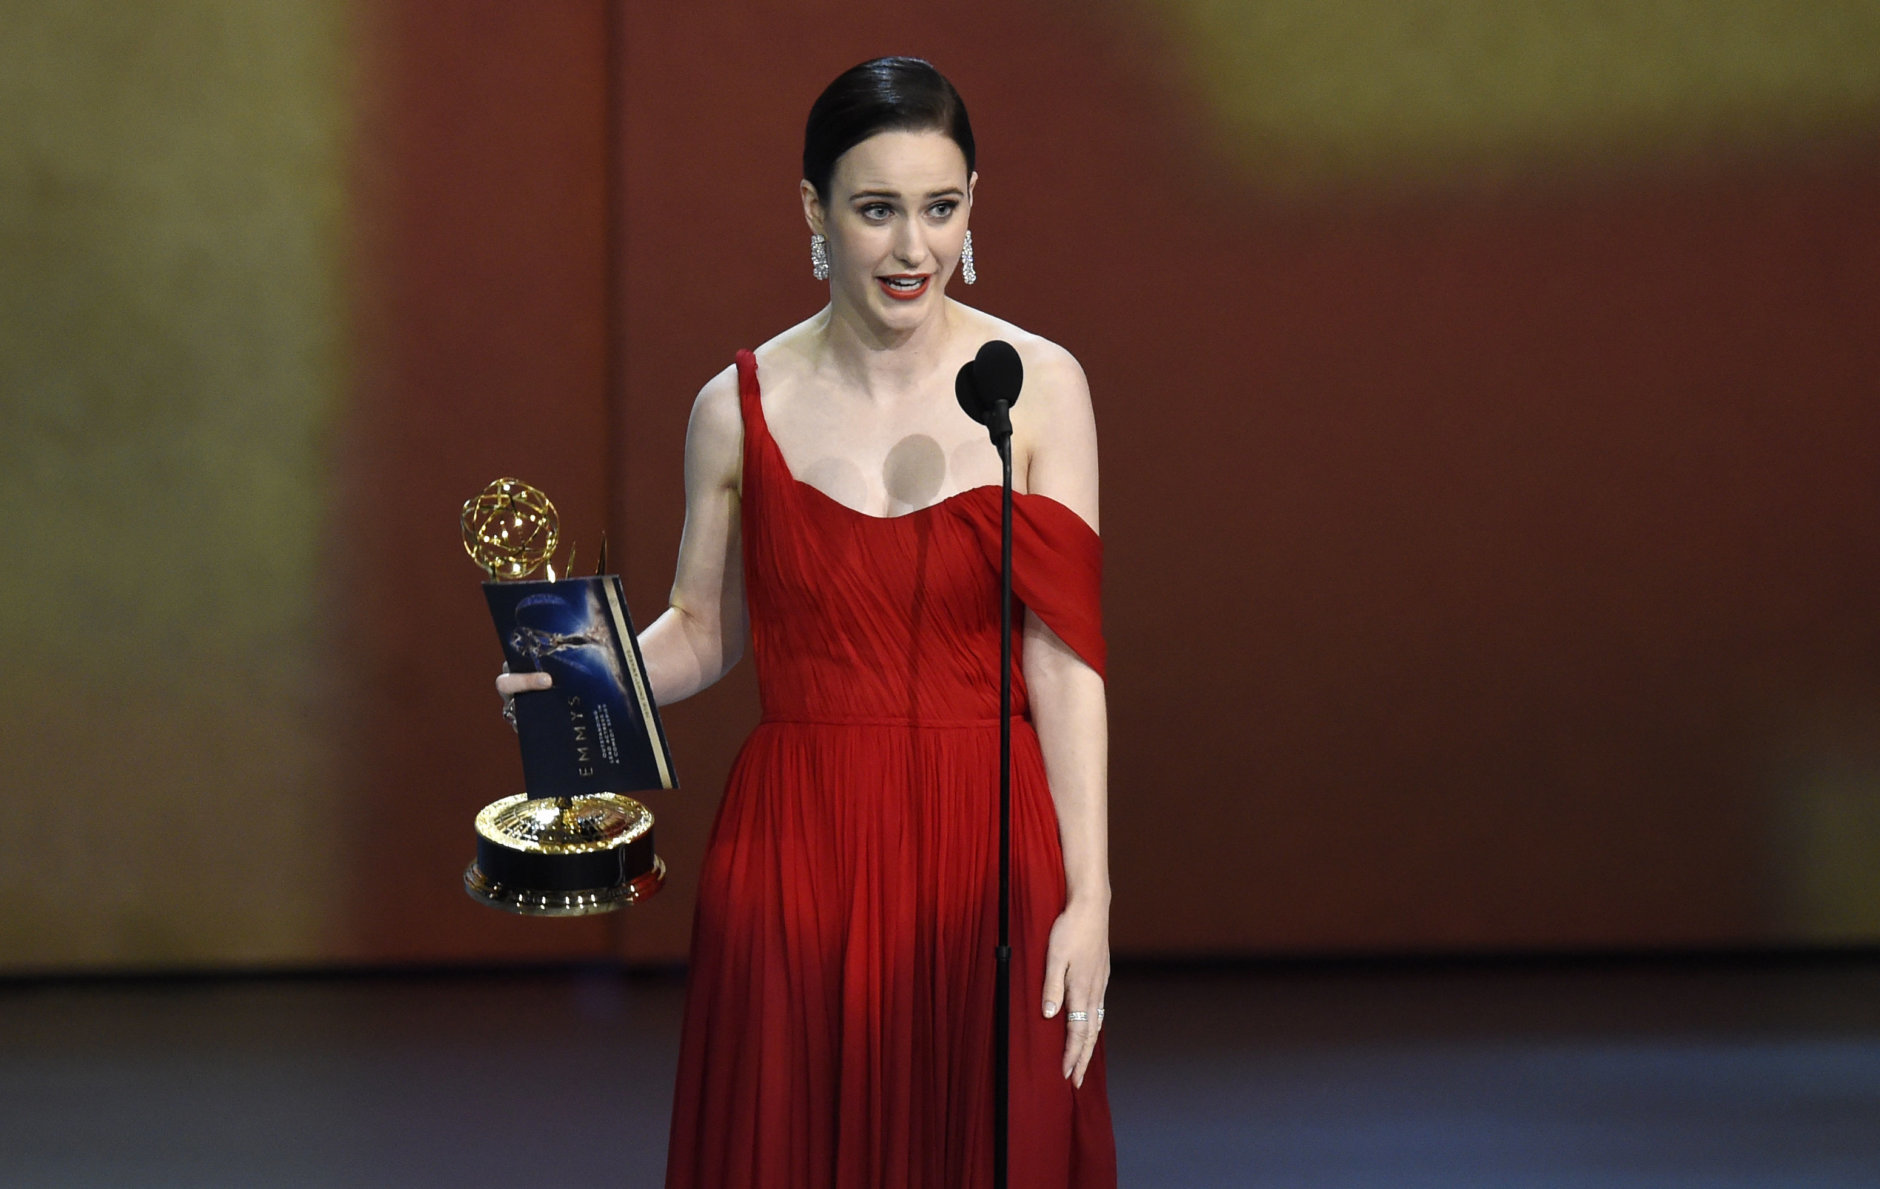 Rachel Brosnahan accepts the award for outstanding lead actress in a comedy series for "The Marvelous Mrs. Maisel" at the 70th Primetime Emmy Awards on Monday, Sept. 17, 2018, at the Microsoft Theater in Los Angeles. (Photo by Chris Pizzello/Invision/AP)